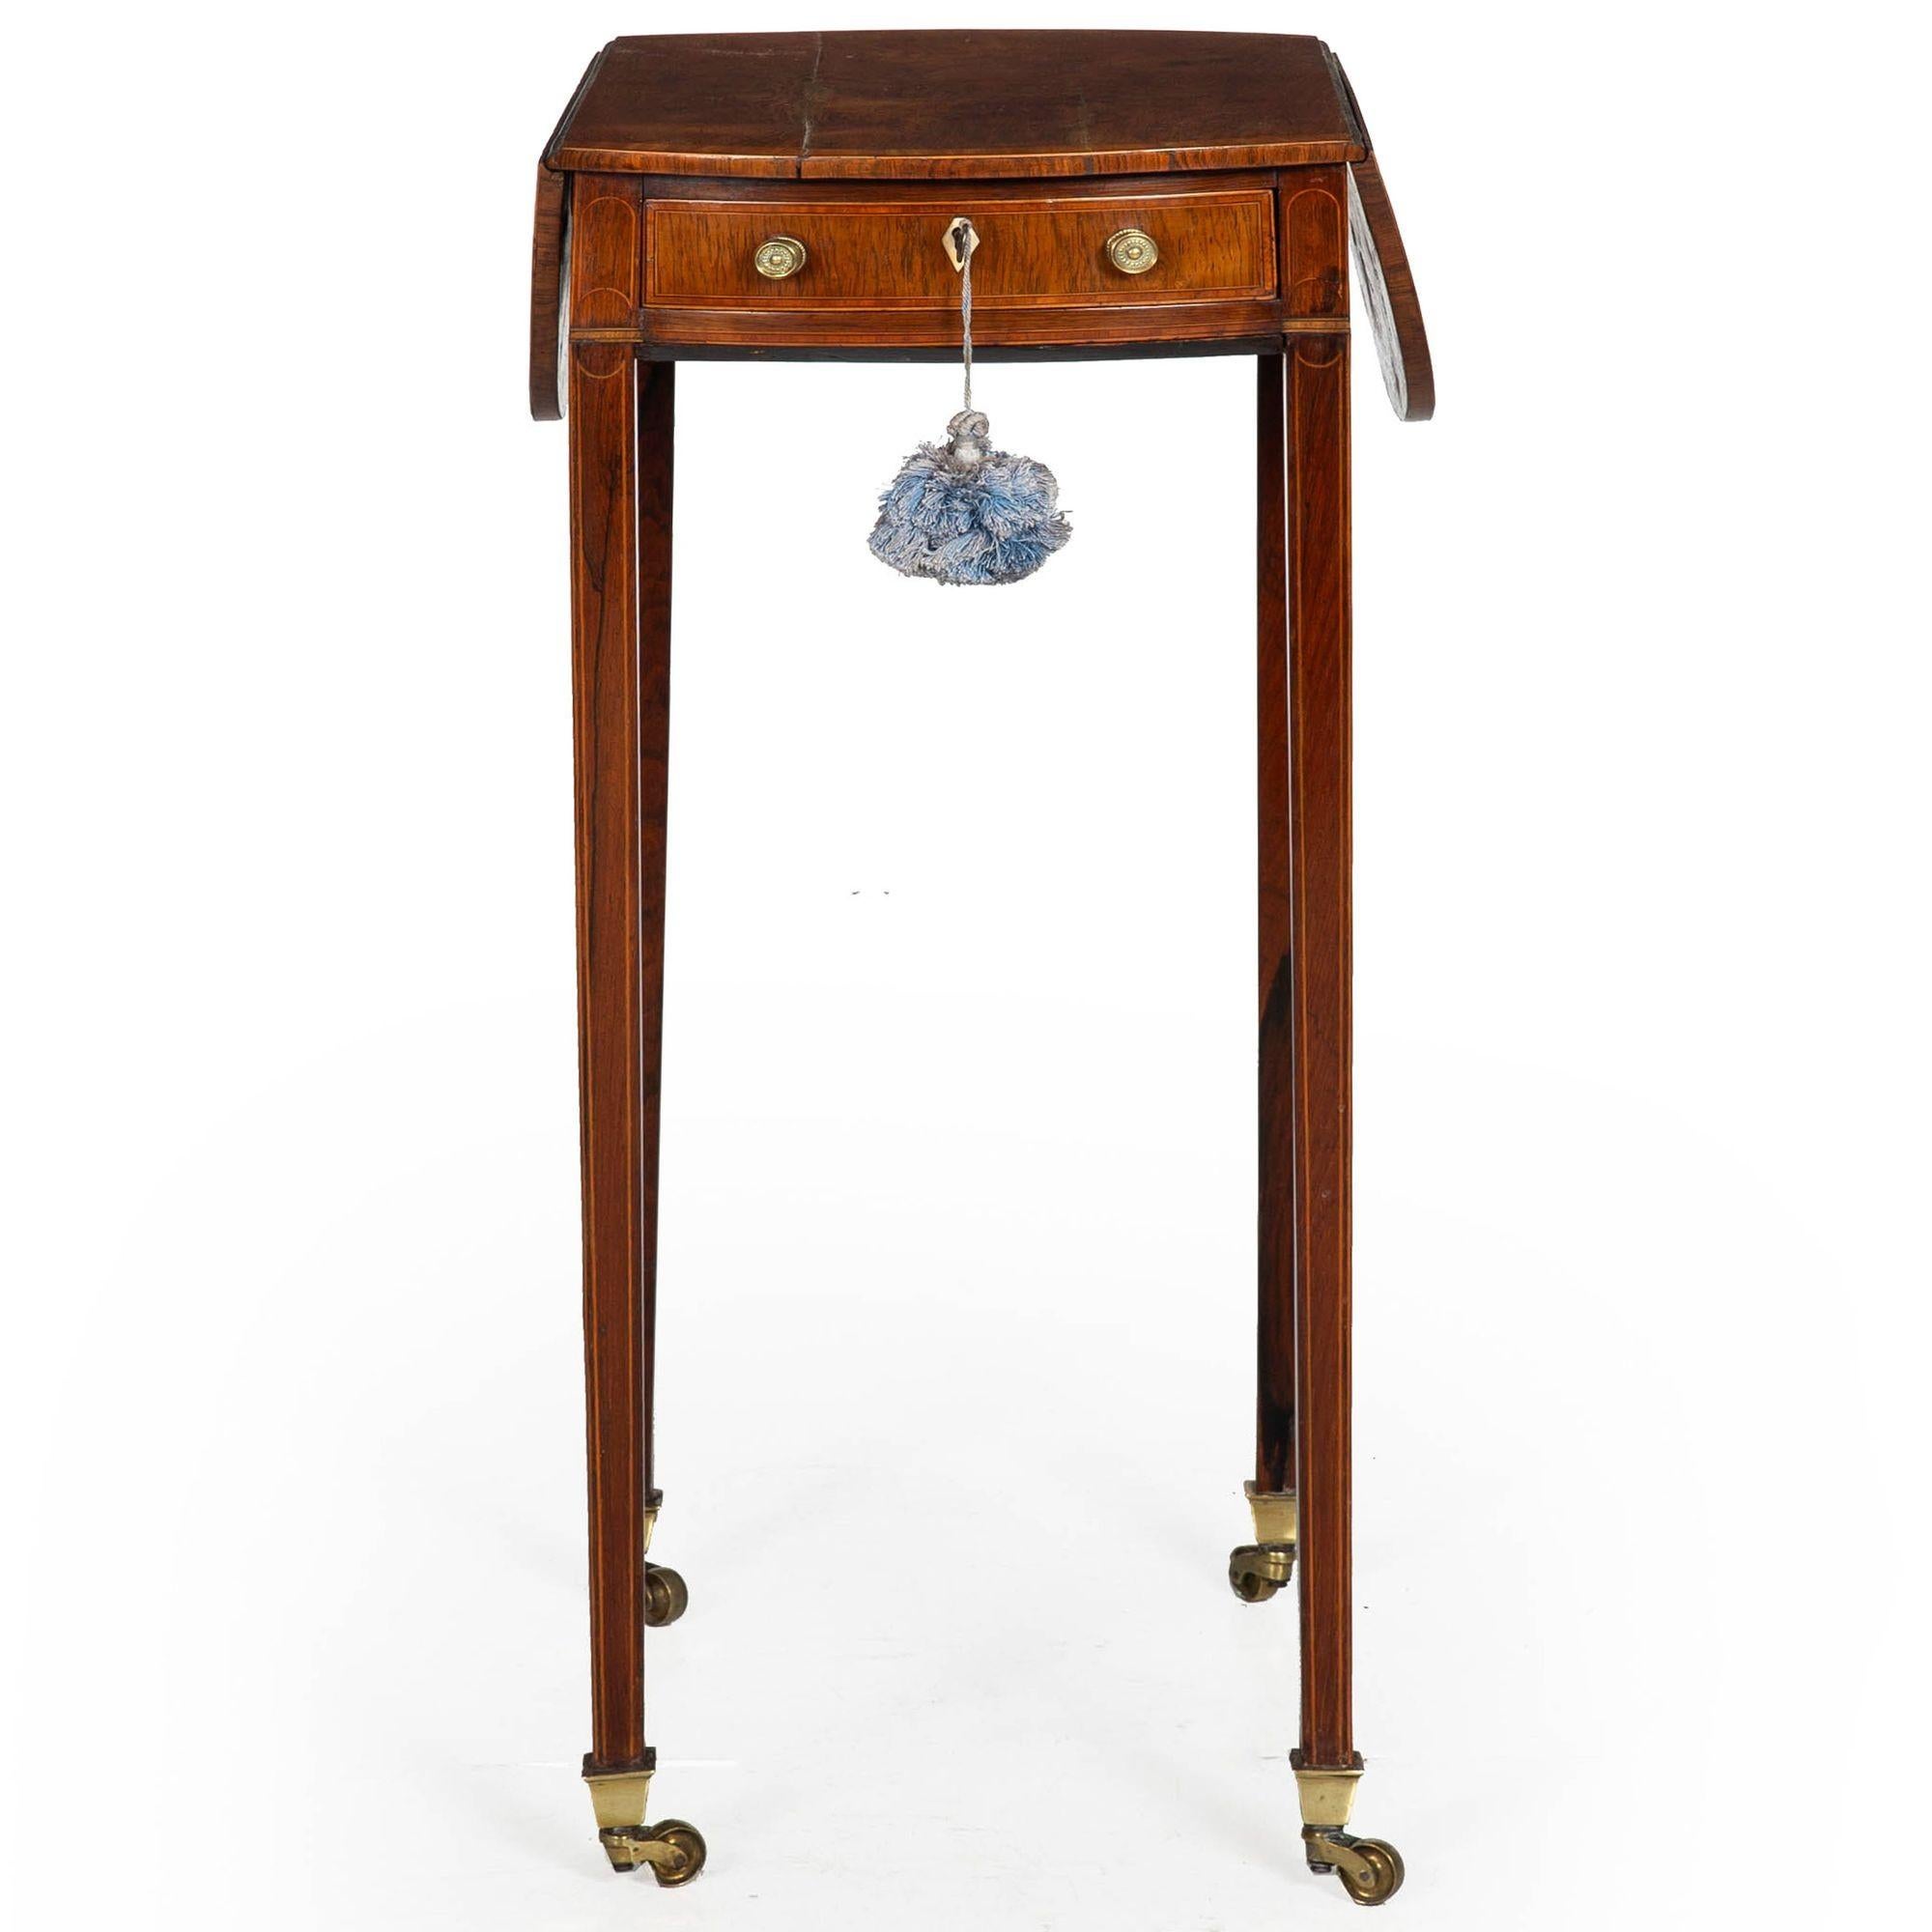 RARE DIMINUTIVE GEORGE III ROSEWOOD AND SATINWOOD-INLAID OVULAR PEMBROKE TABLE OF THE SHERATON PERIOD
England, circa 1795
Item # 403LRB02A

A fine and rare George III drop-leaf pembroke table of the Sheraton Period, this example is characterized by